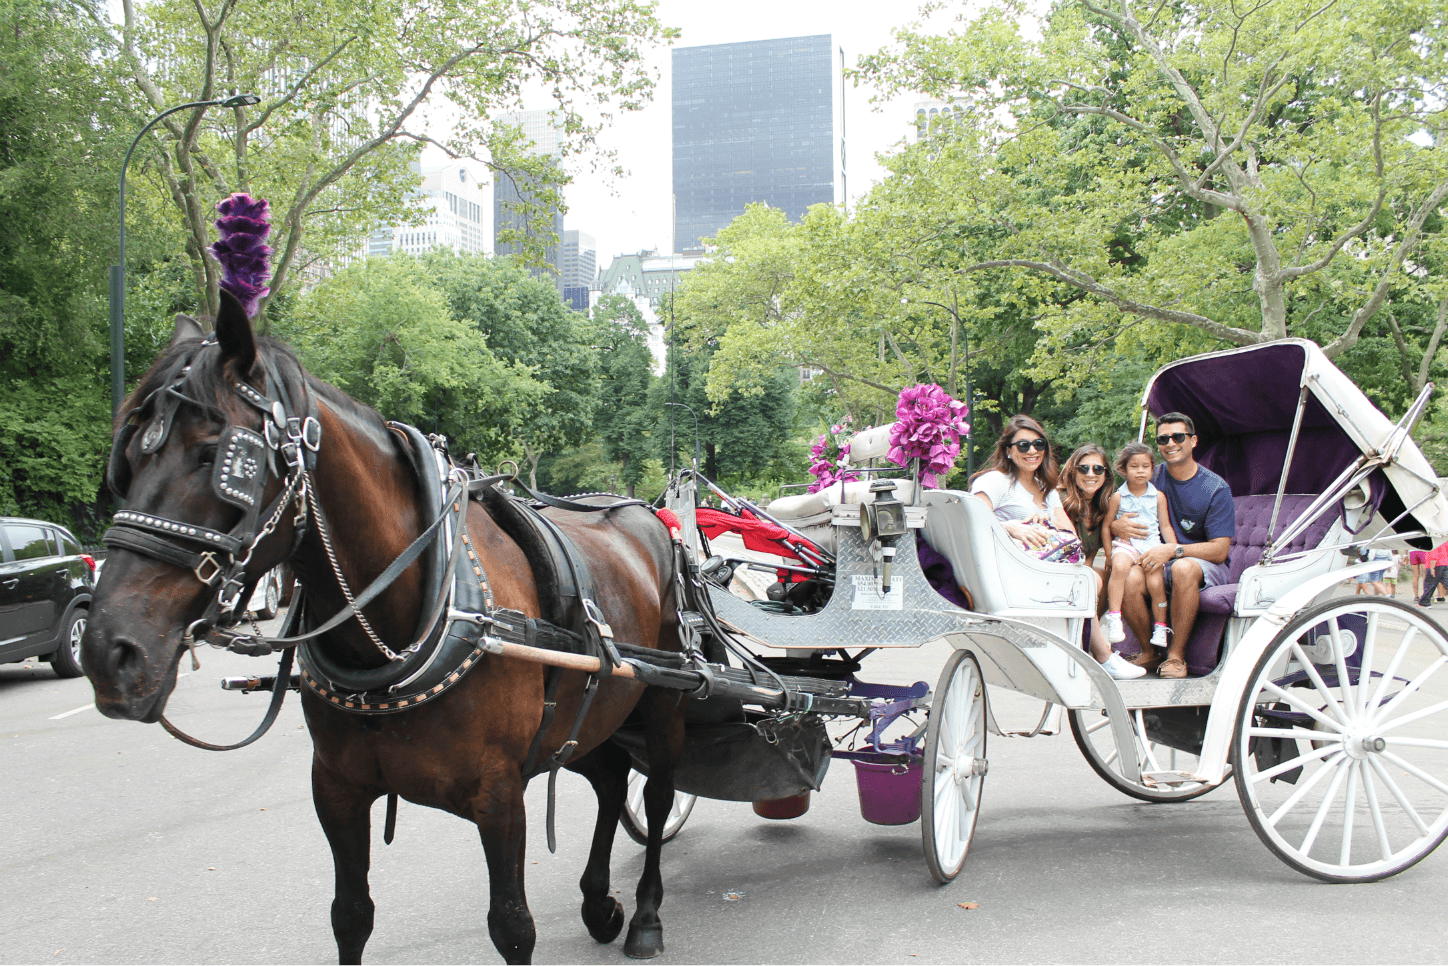 Kid-friendly activities in New York City | Kid-Friendly Activities in NYC. Fun things to do in NYC with your family. Central Park carriage ride.